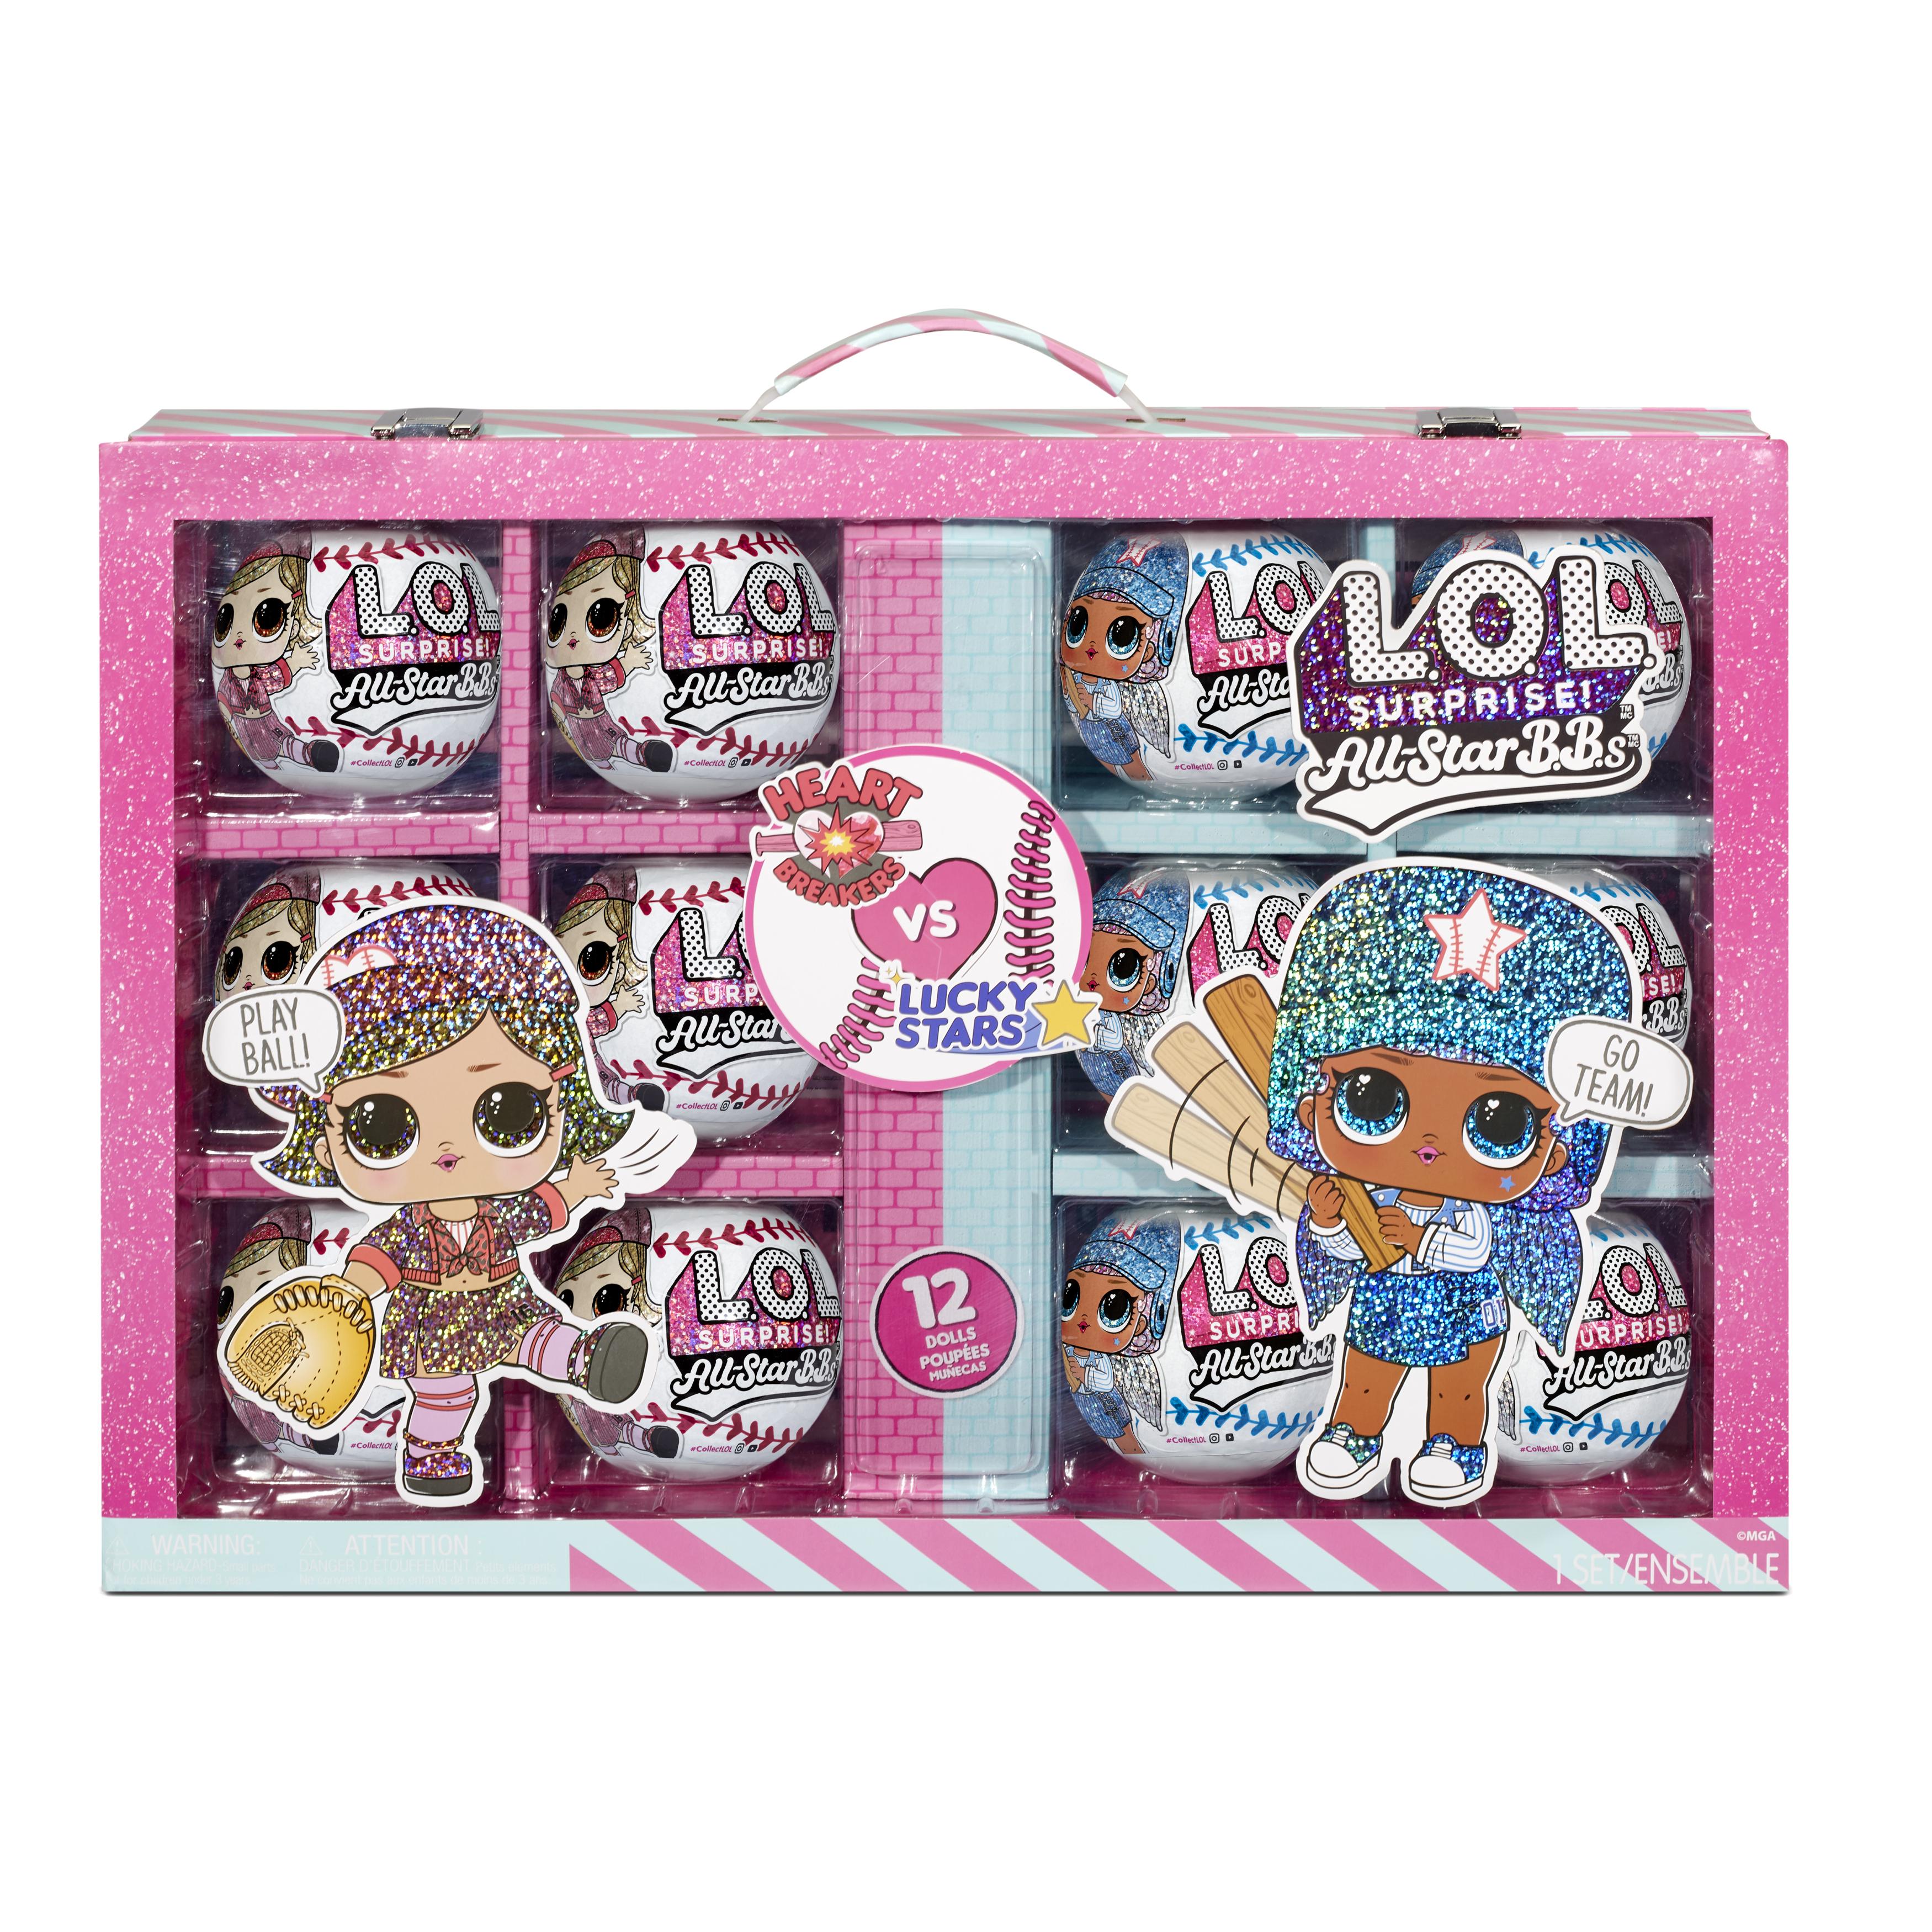 L.O.L. Surprise! - All Stars BBs Ultimate Collection (576754)